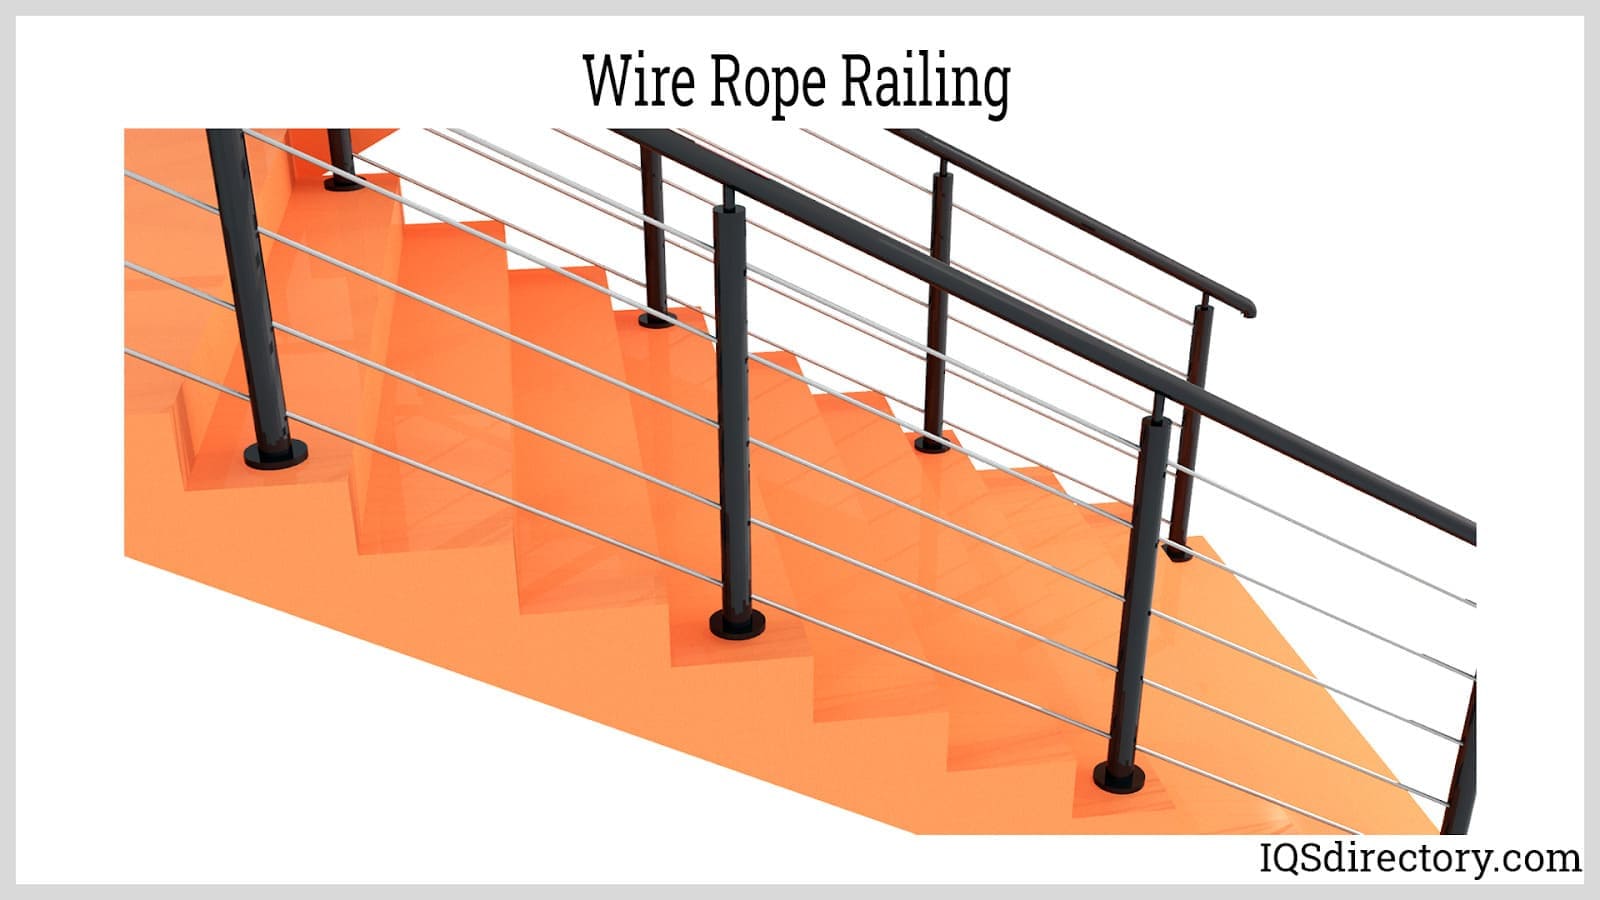 Wire Rope Railing